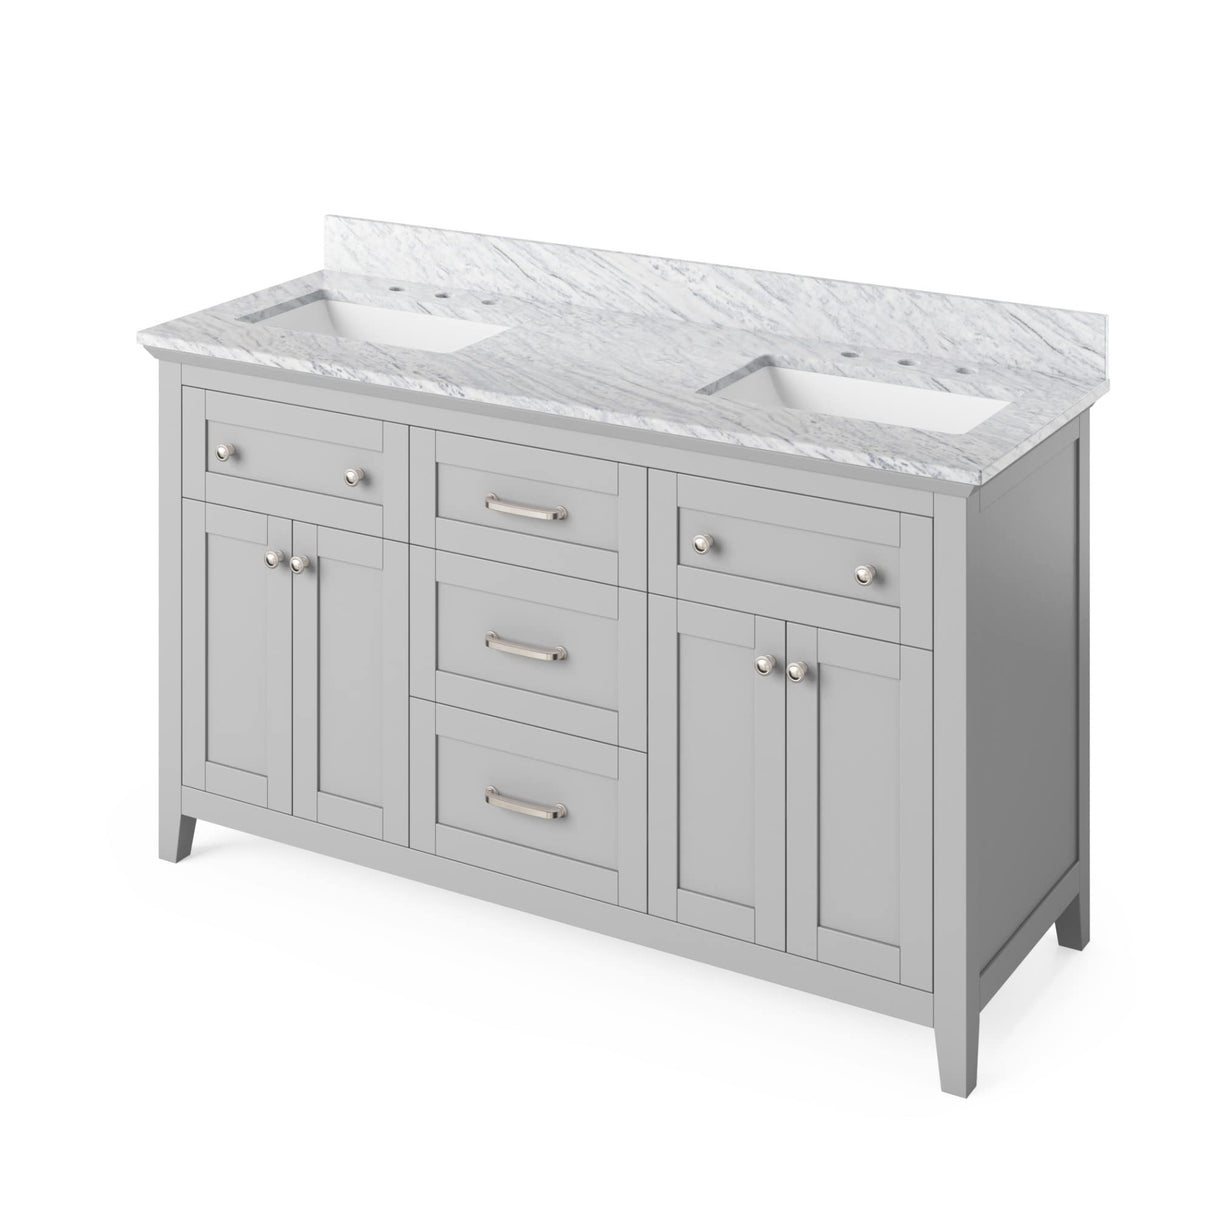 Jeffrey Alexander VKITCHA60WHSGR 60" White Chatham Vanity, double bowl, Steel Grey Cultured Marble Vanity Top, two undermount rectangle bowls